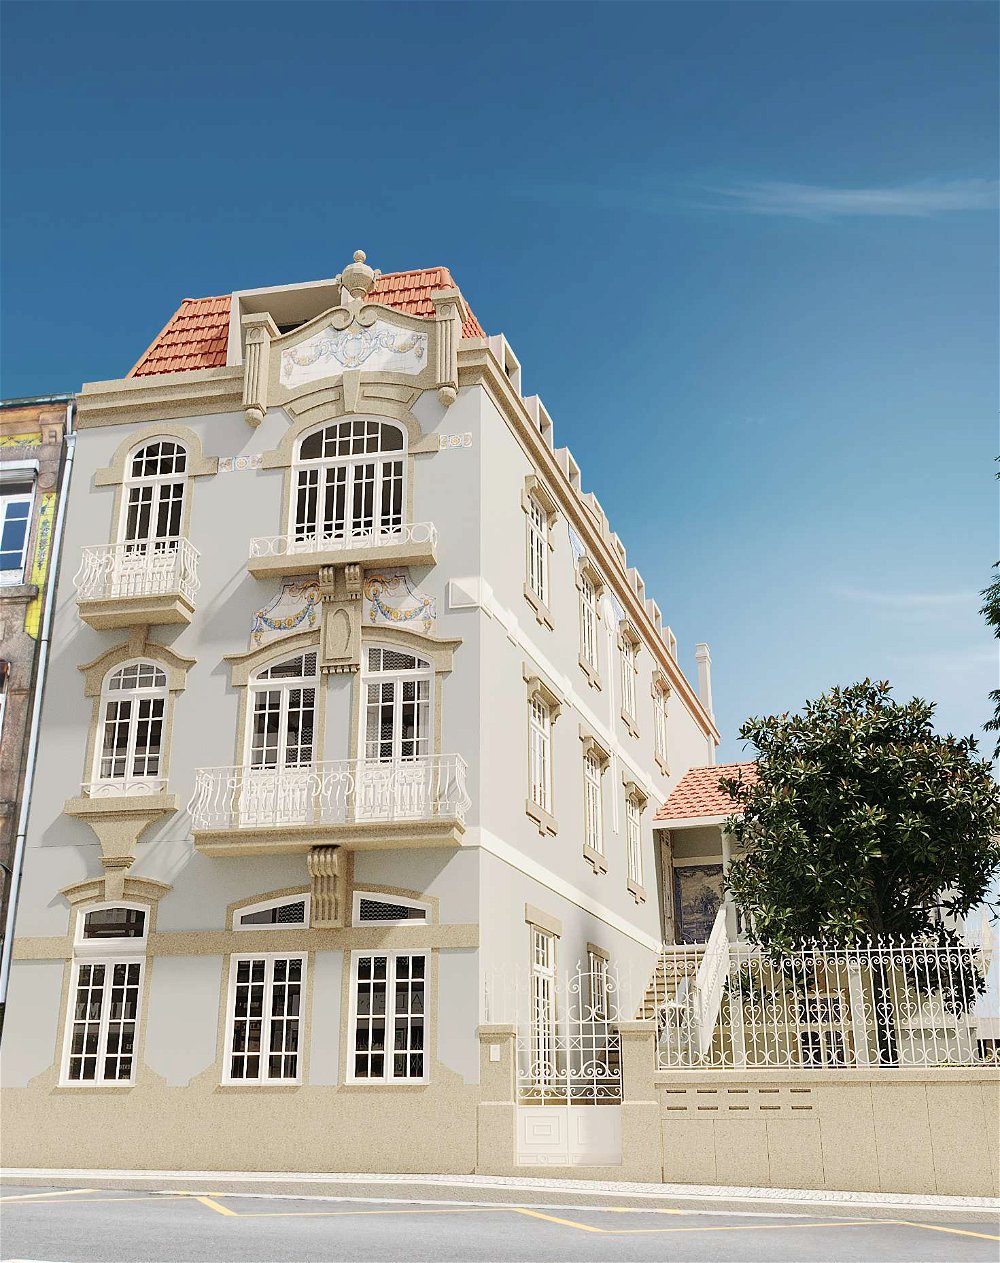 3 bedroom apartment duplex with balcony and parking in Porto 2742122643